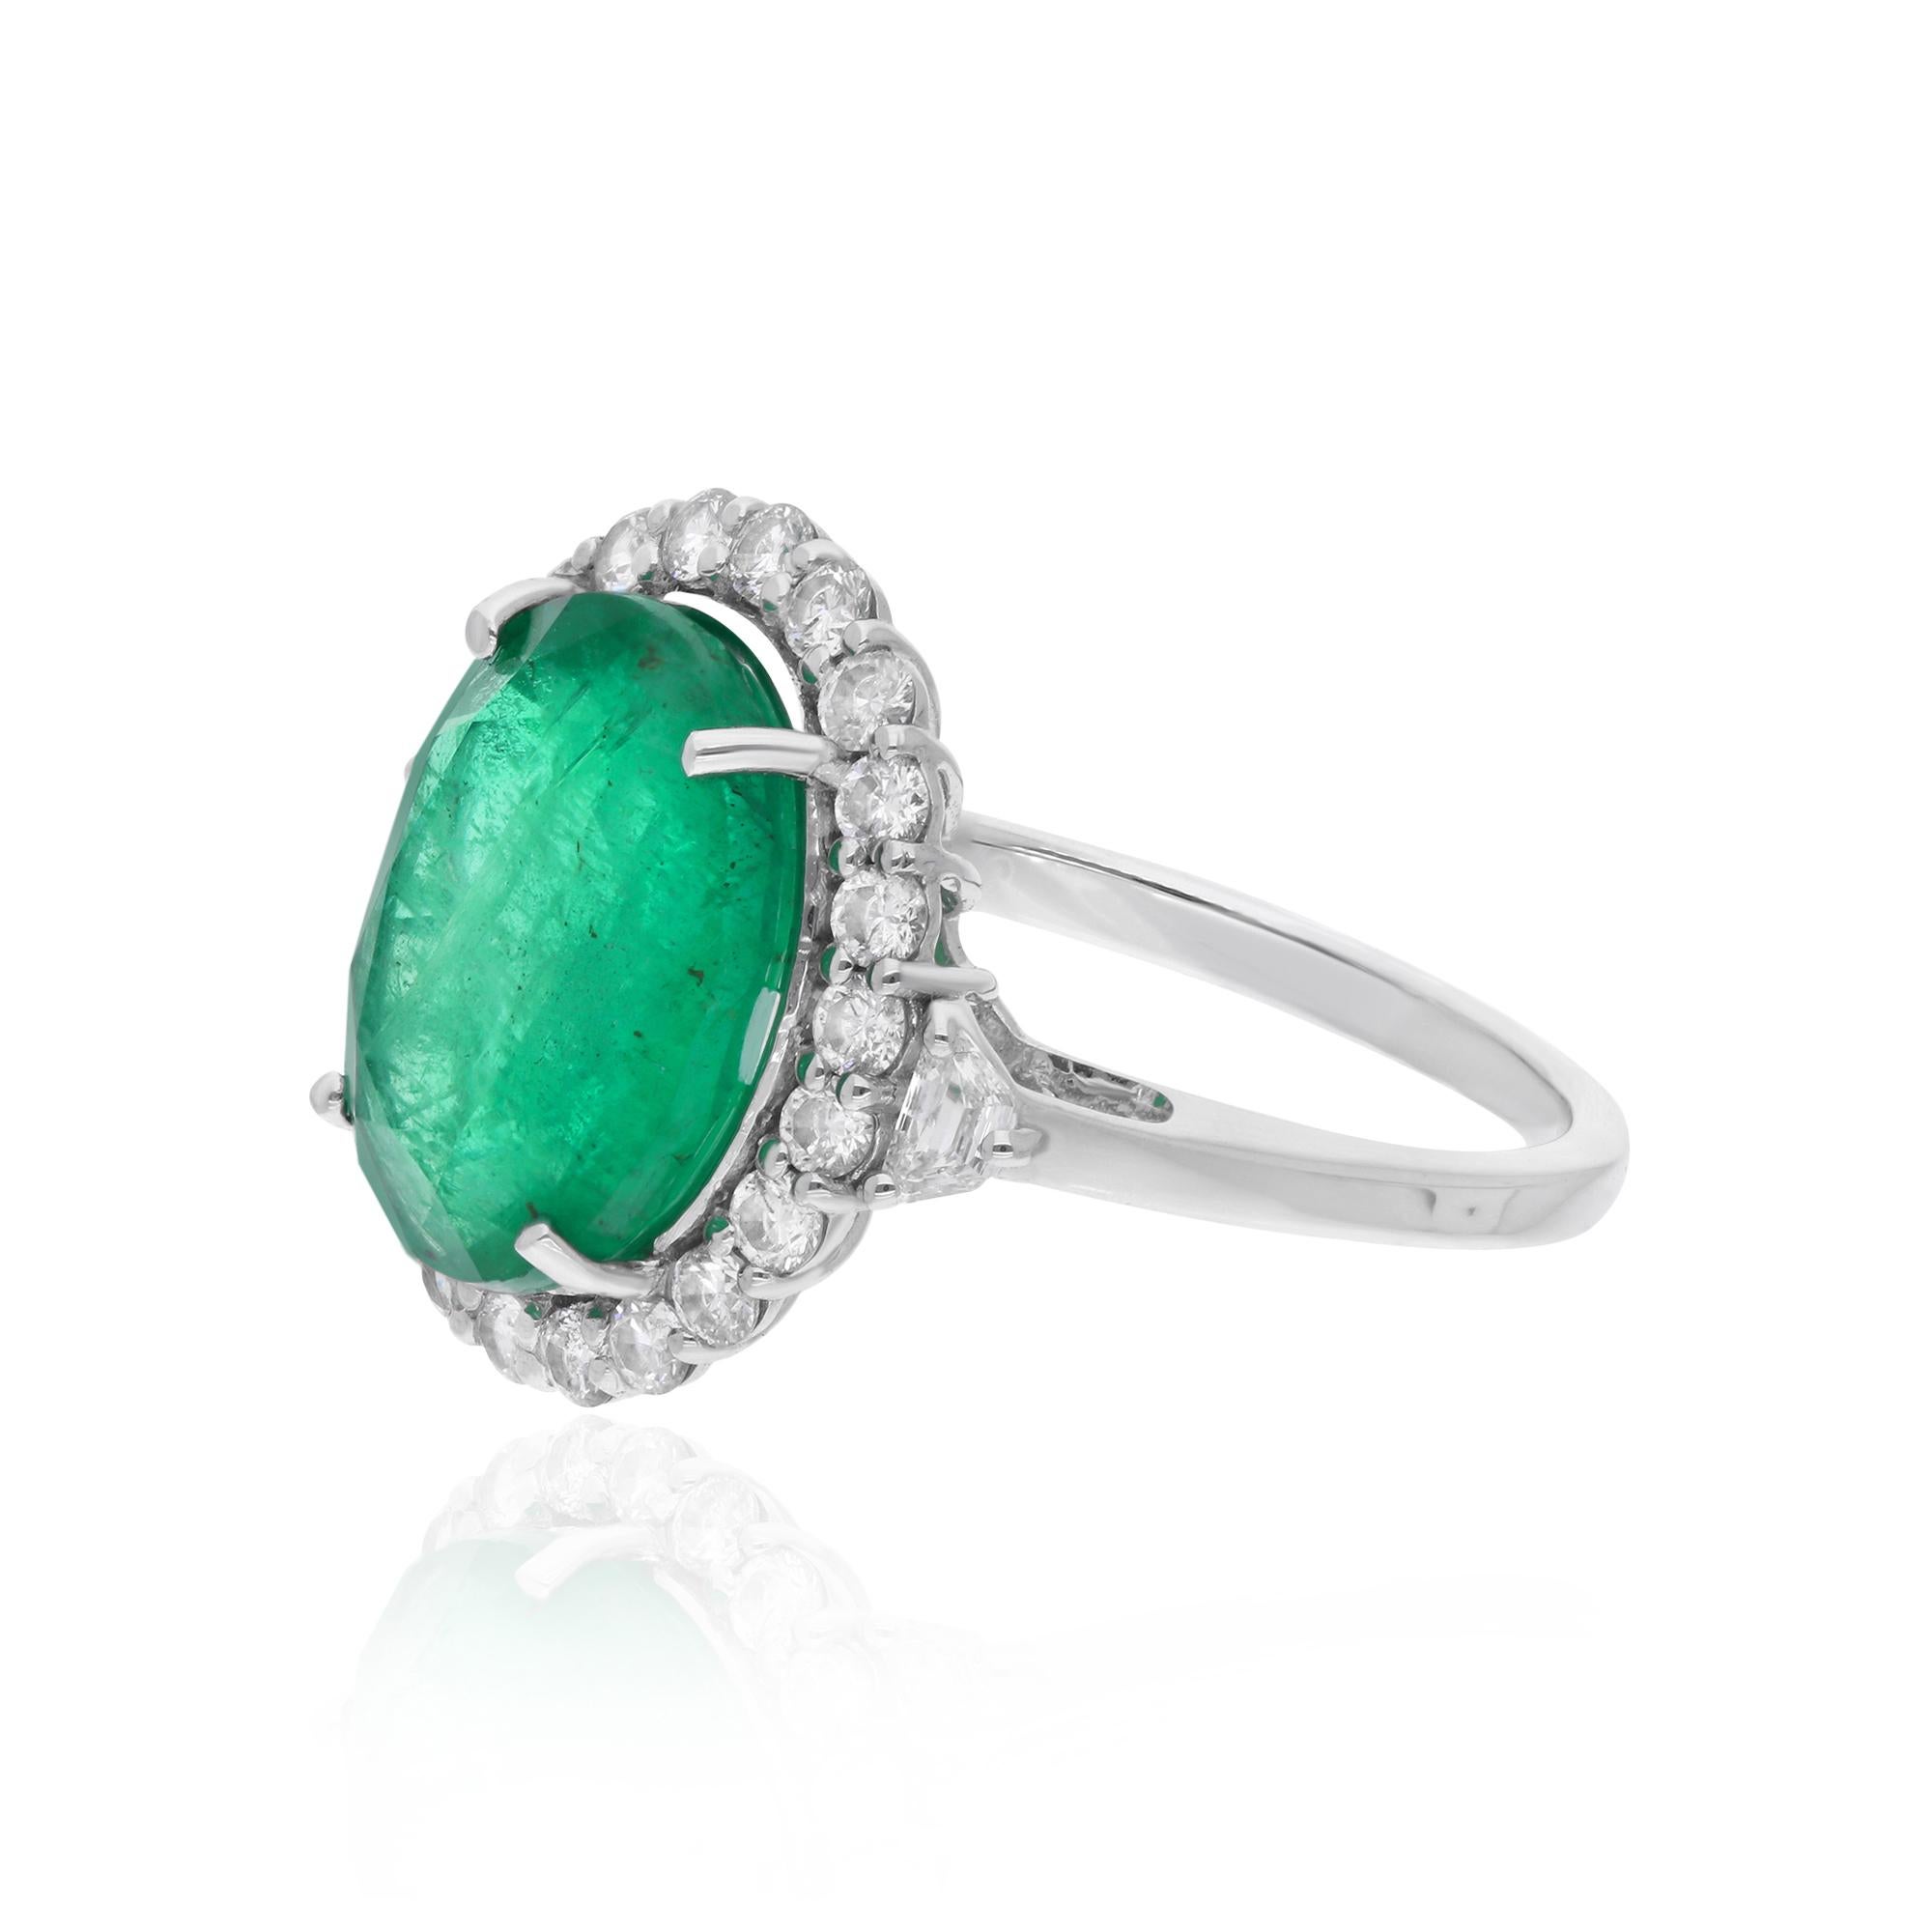 The intricate details of the 14 Karat White Gold band further enhance the ring's exquisite beauty. The cool, silvery tones of the white gold provide the perfect backdrop for the vivid green of the emerald and the scintillating sparkle of the